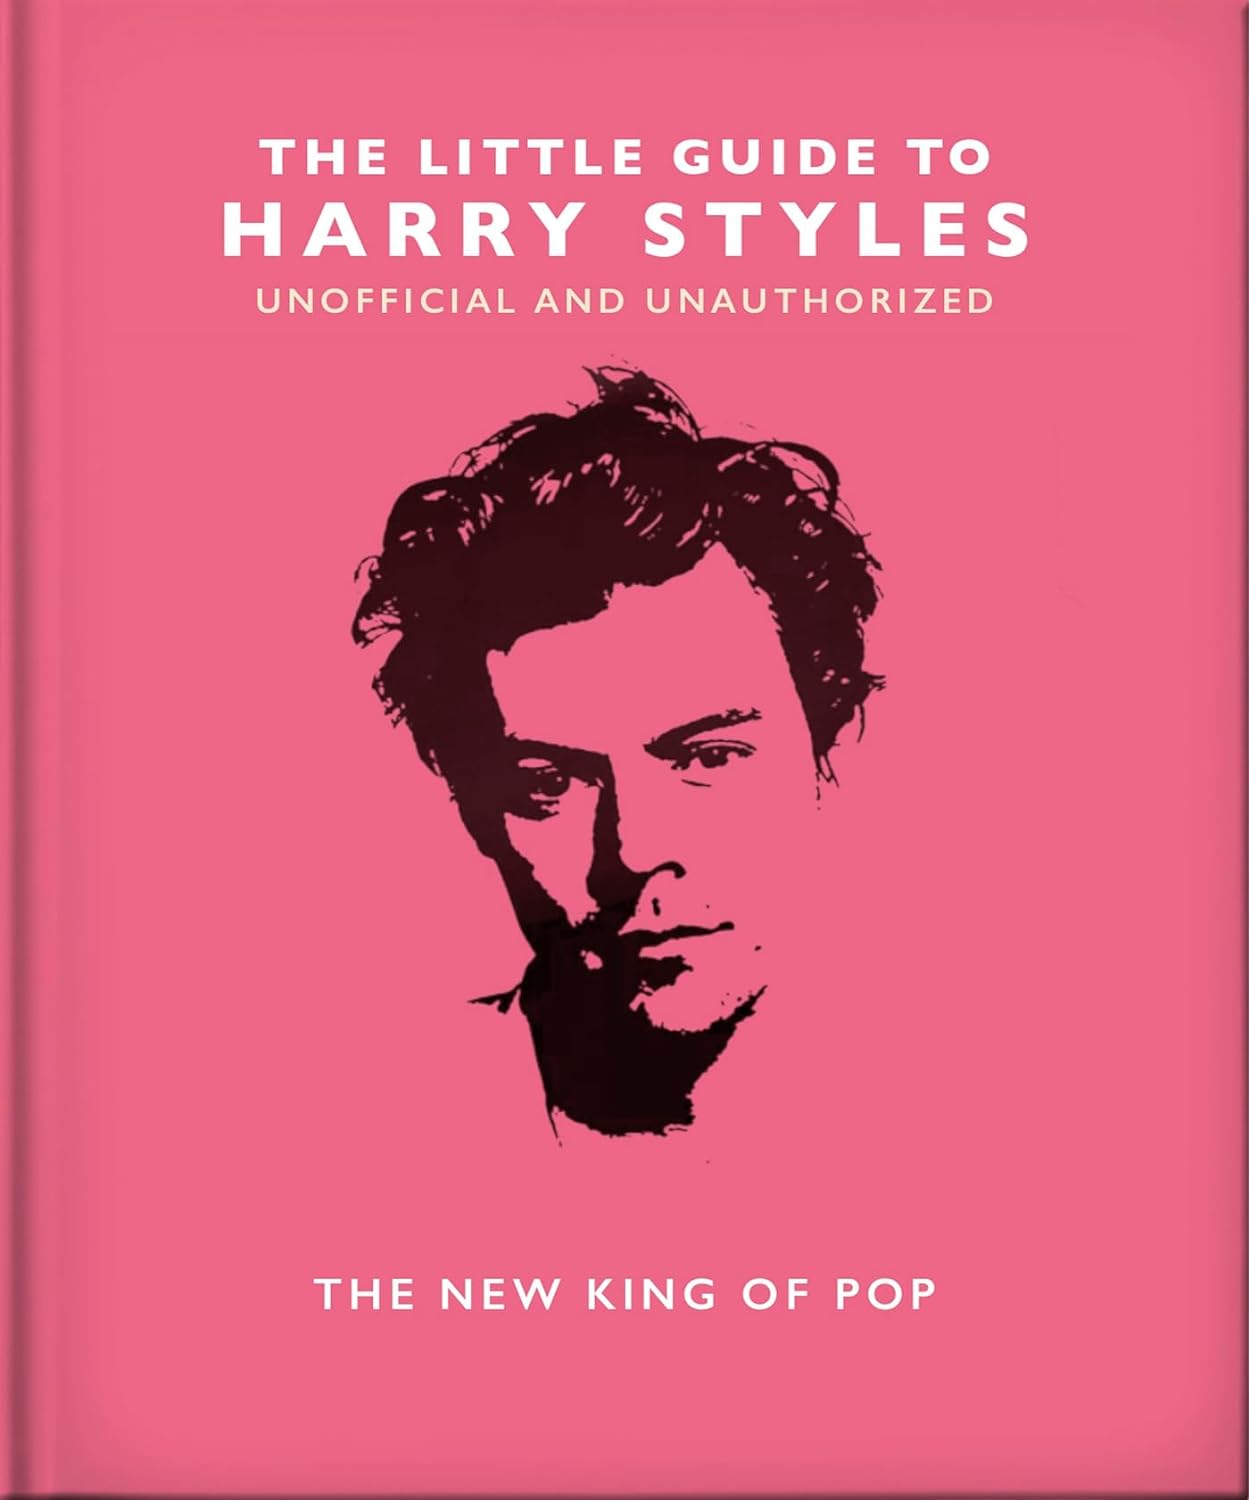 Book - The Little Guide to Harry Styles: The New King of Pop